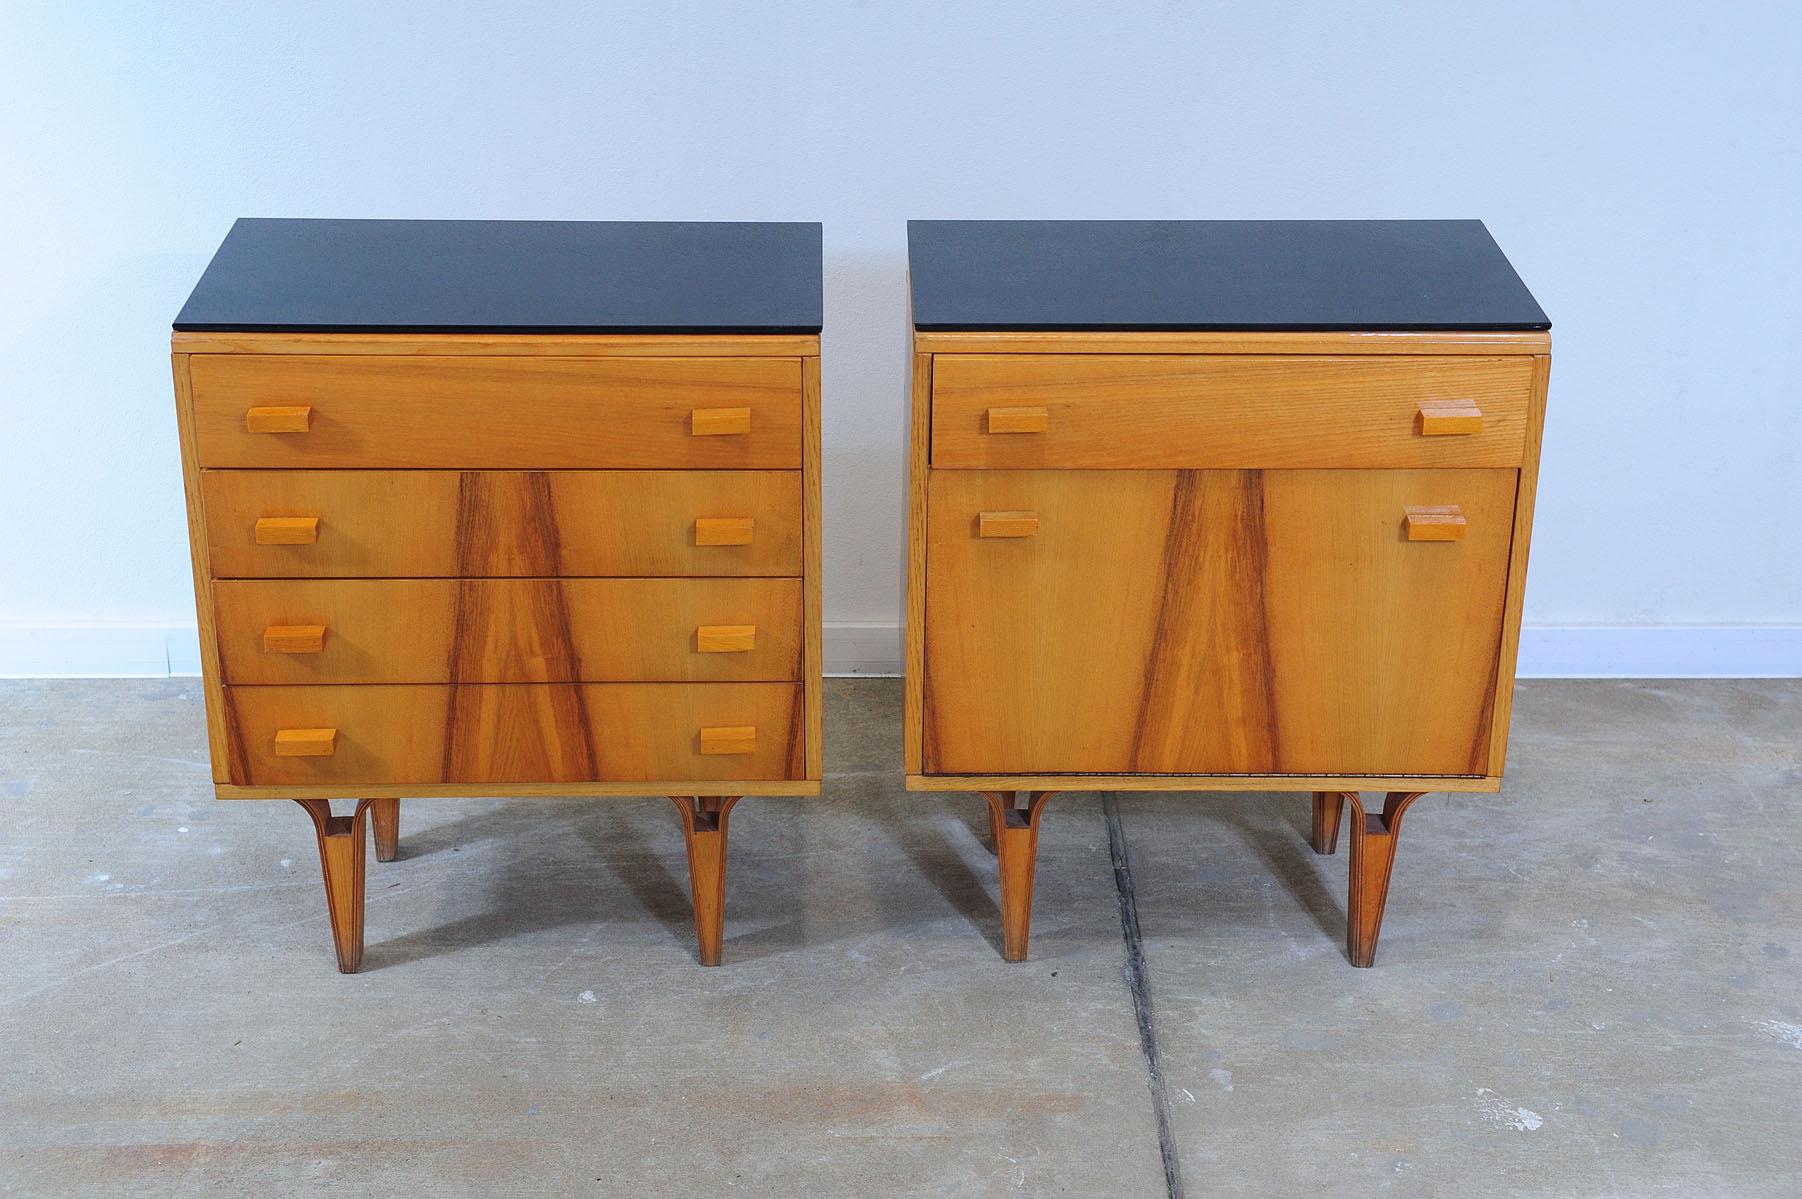 Pair of Mid century night stands, chest of drawers by Frantisek Mezulanik, Nový Domov, 1970´s

These night tables were designed by Czechoslovak architect František Mezulánik for Nový Domov company in the former Czechoslovakia in the 1970´s.

They